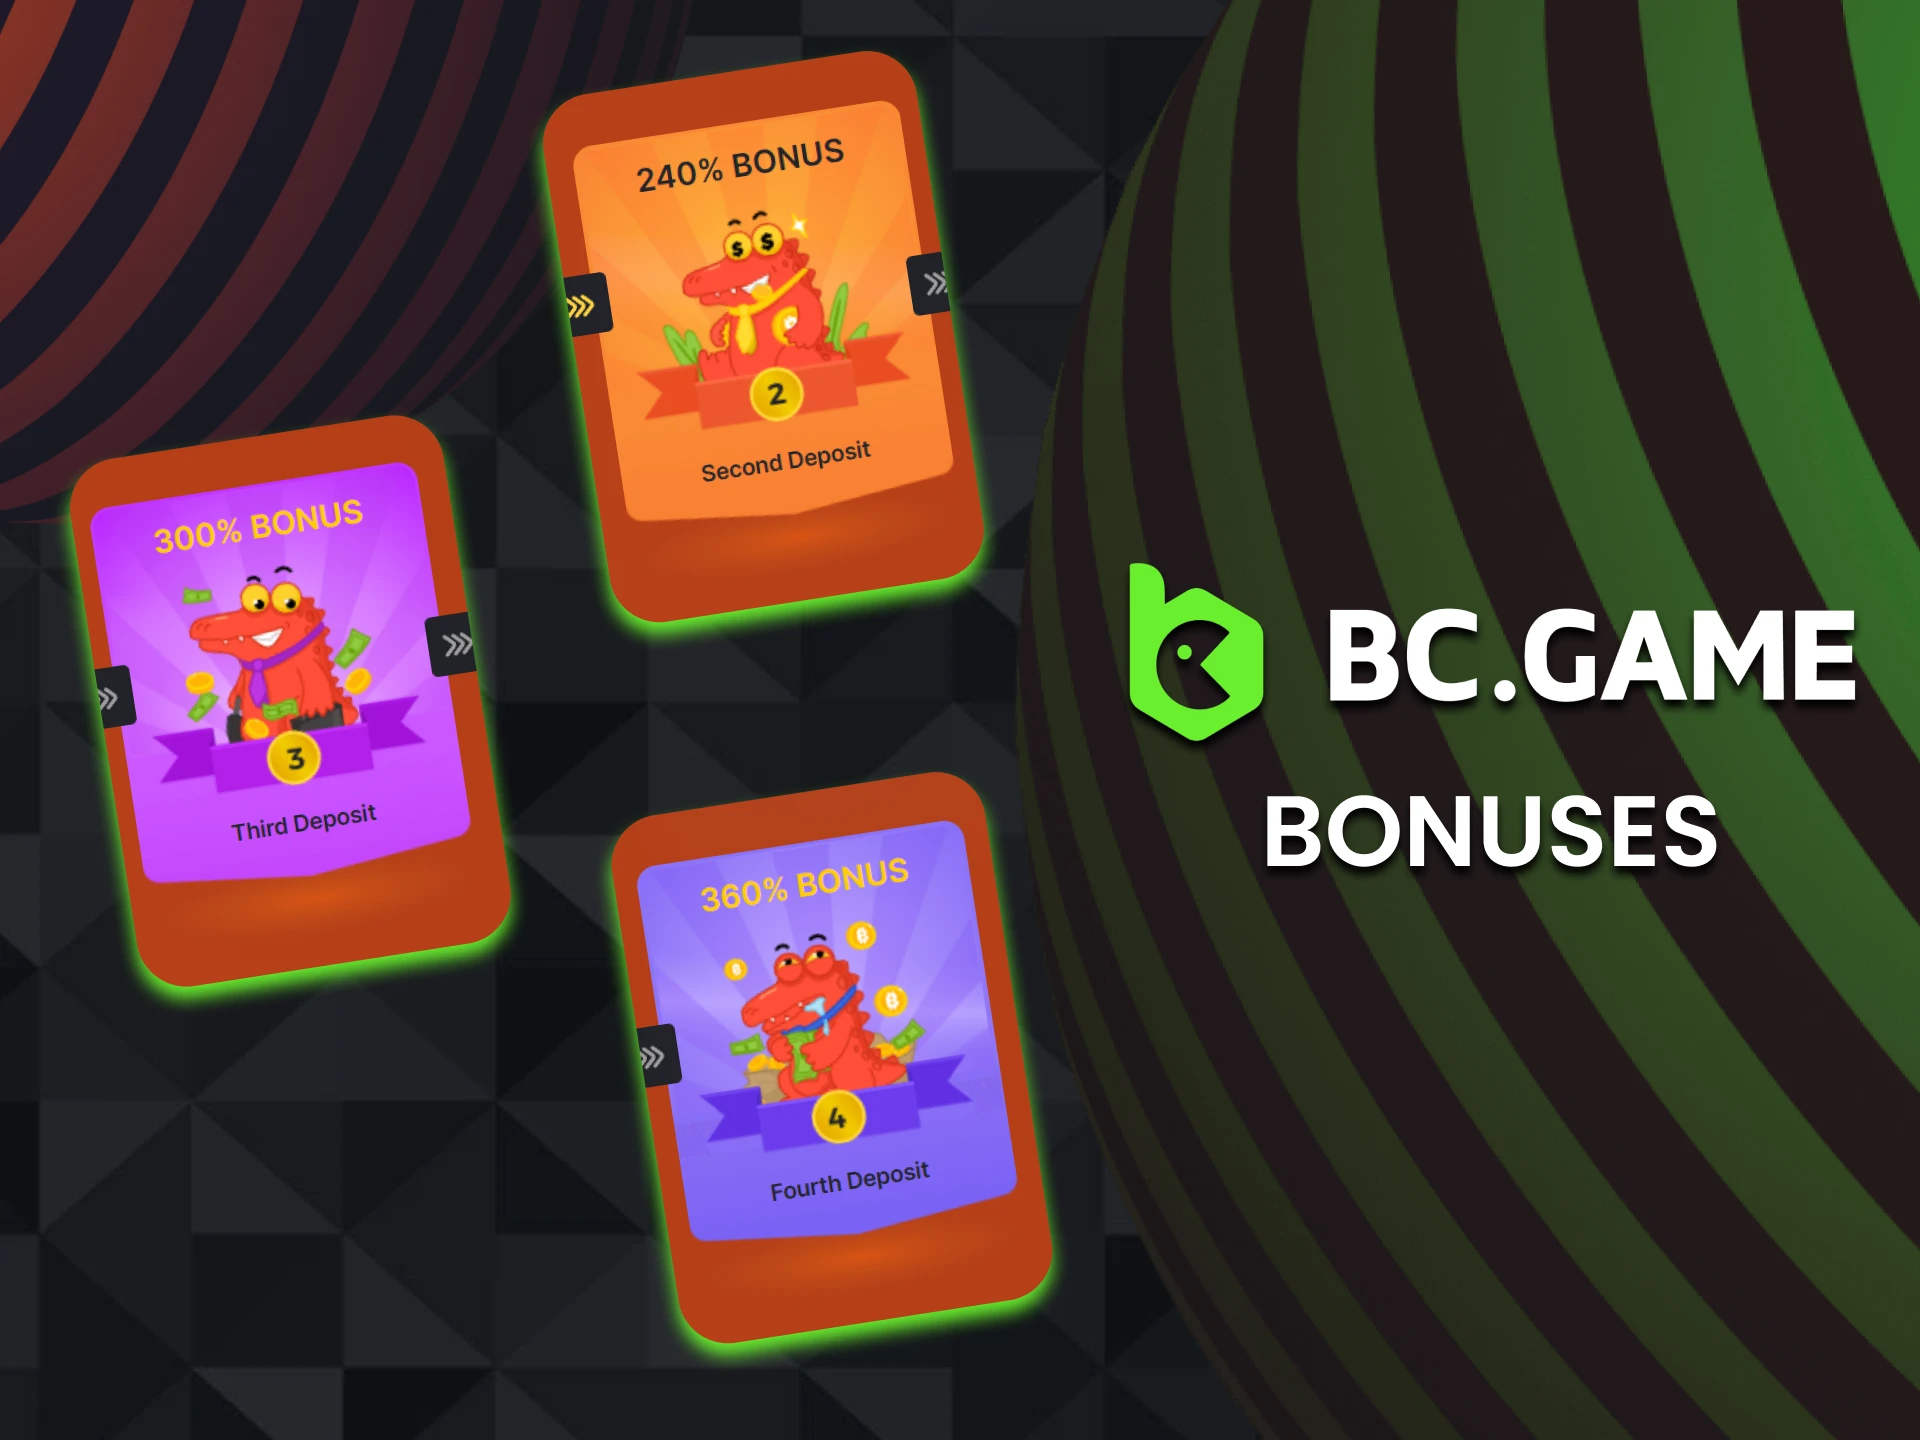 When playing roulette on BC Game you get bonuses.